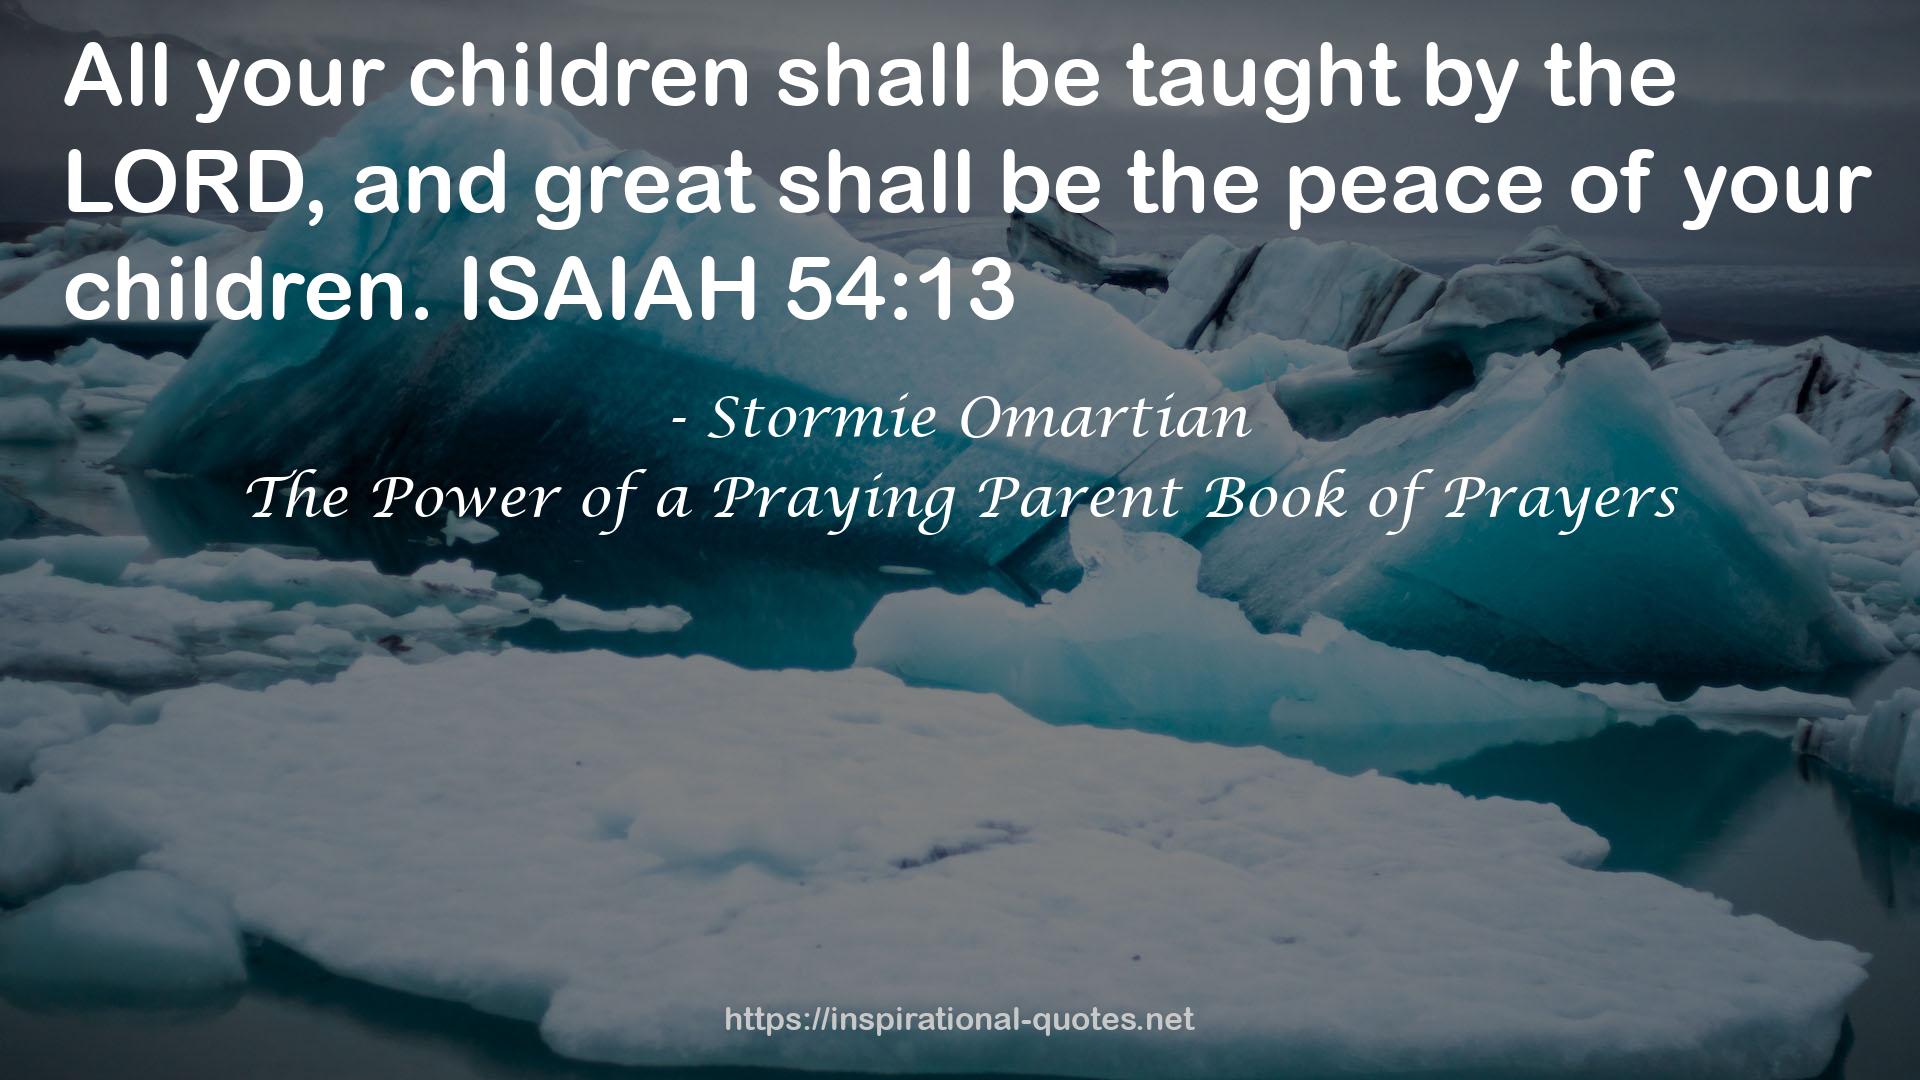 The Power of a Praying Parent Book of Prayers QUOTES